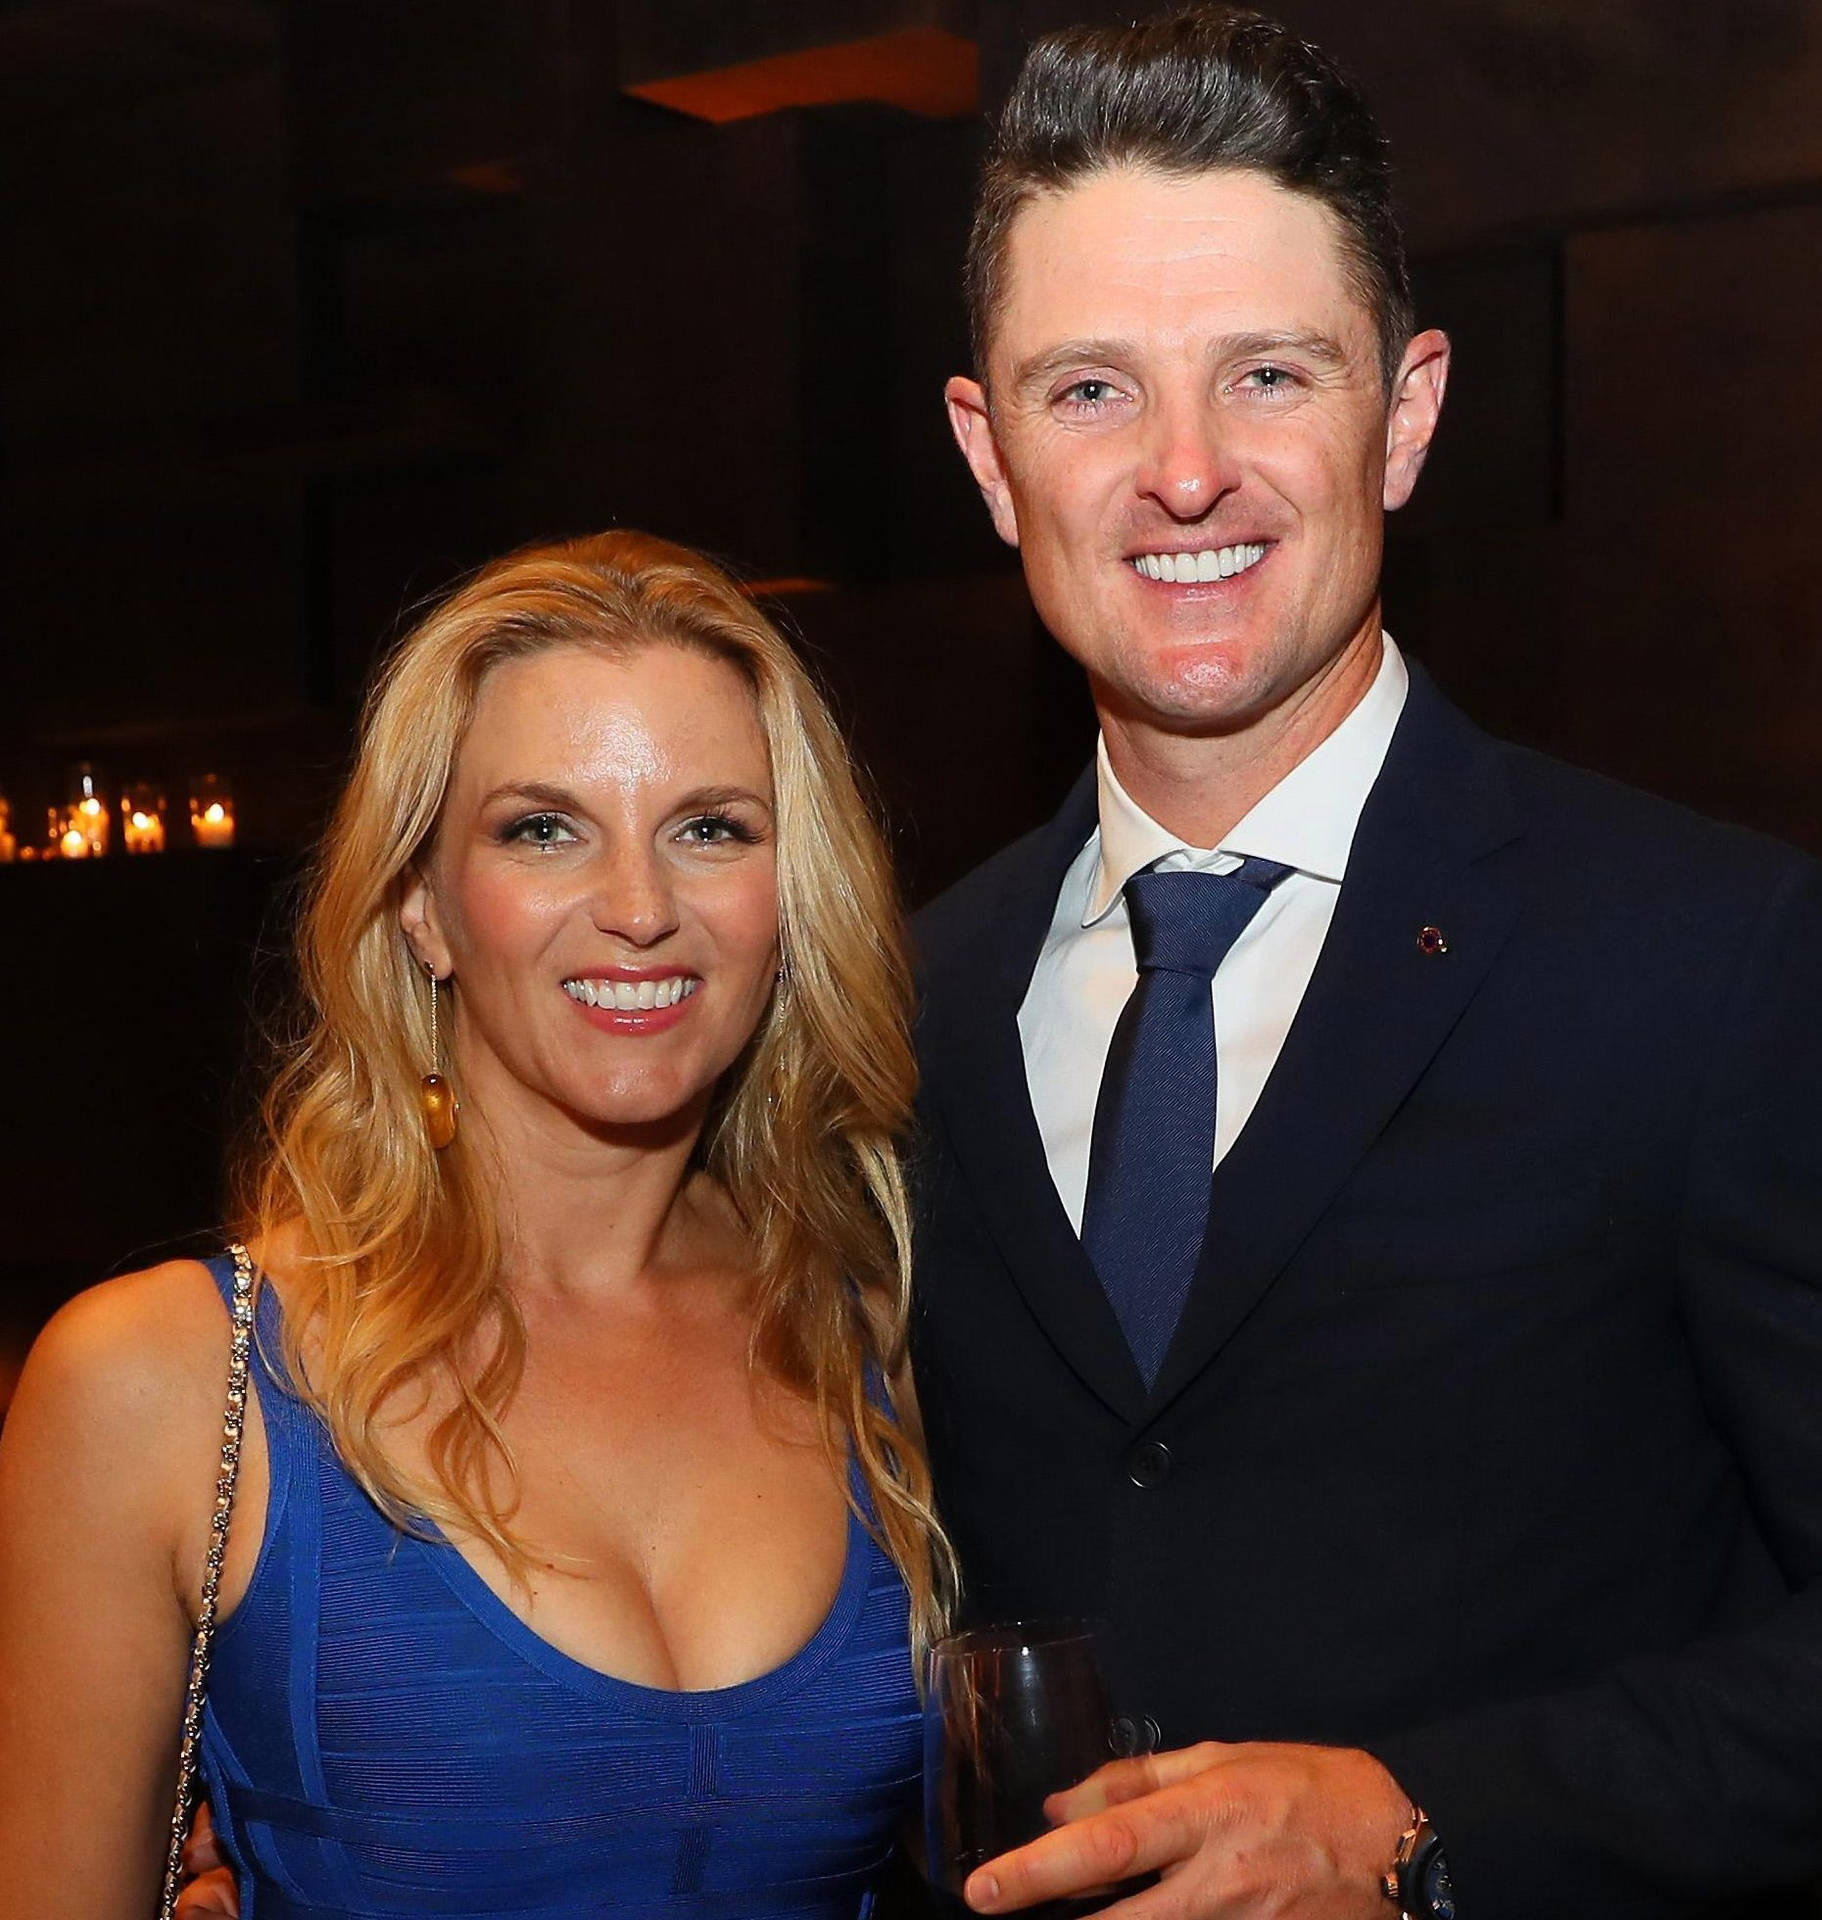 Justin Rose Smiling With Kate Phillips Wallpaper